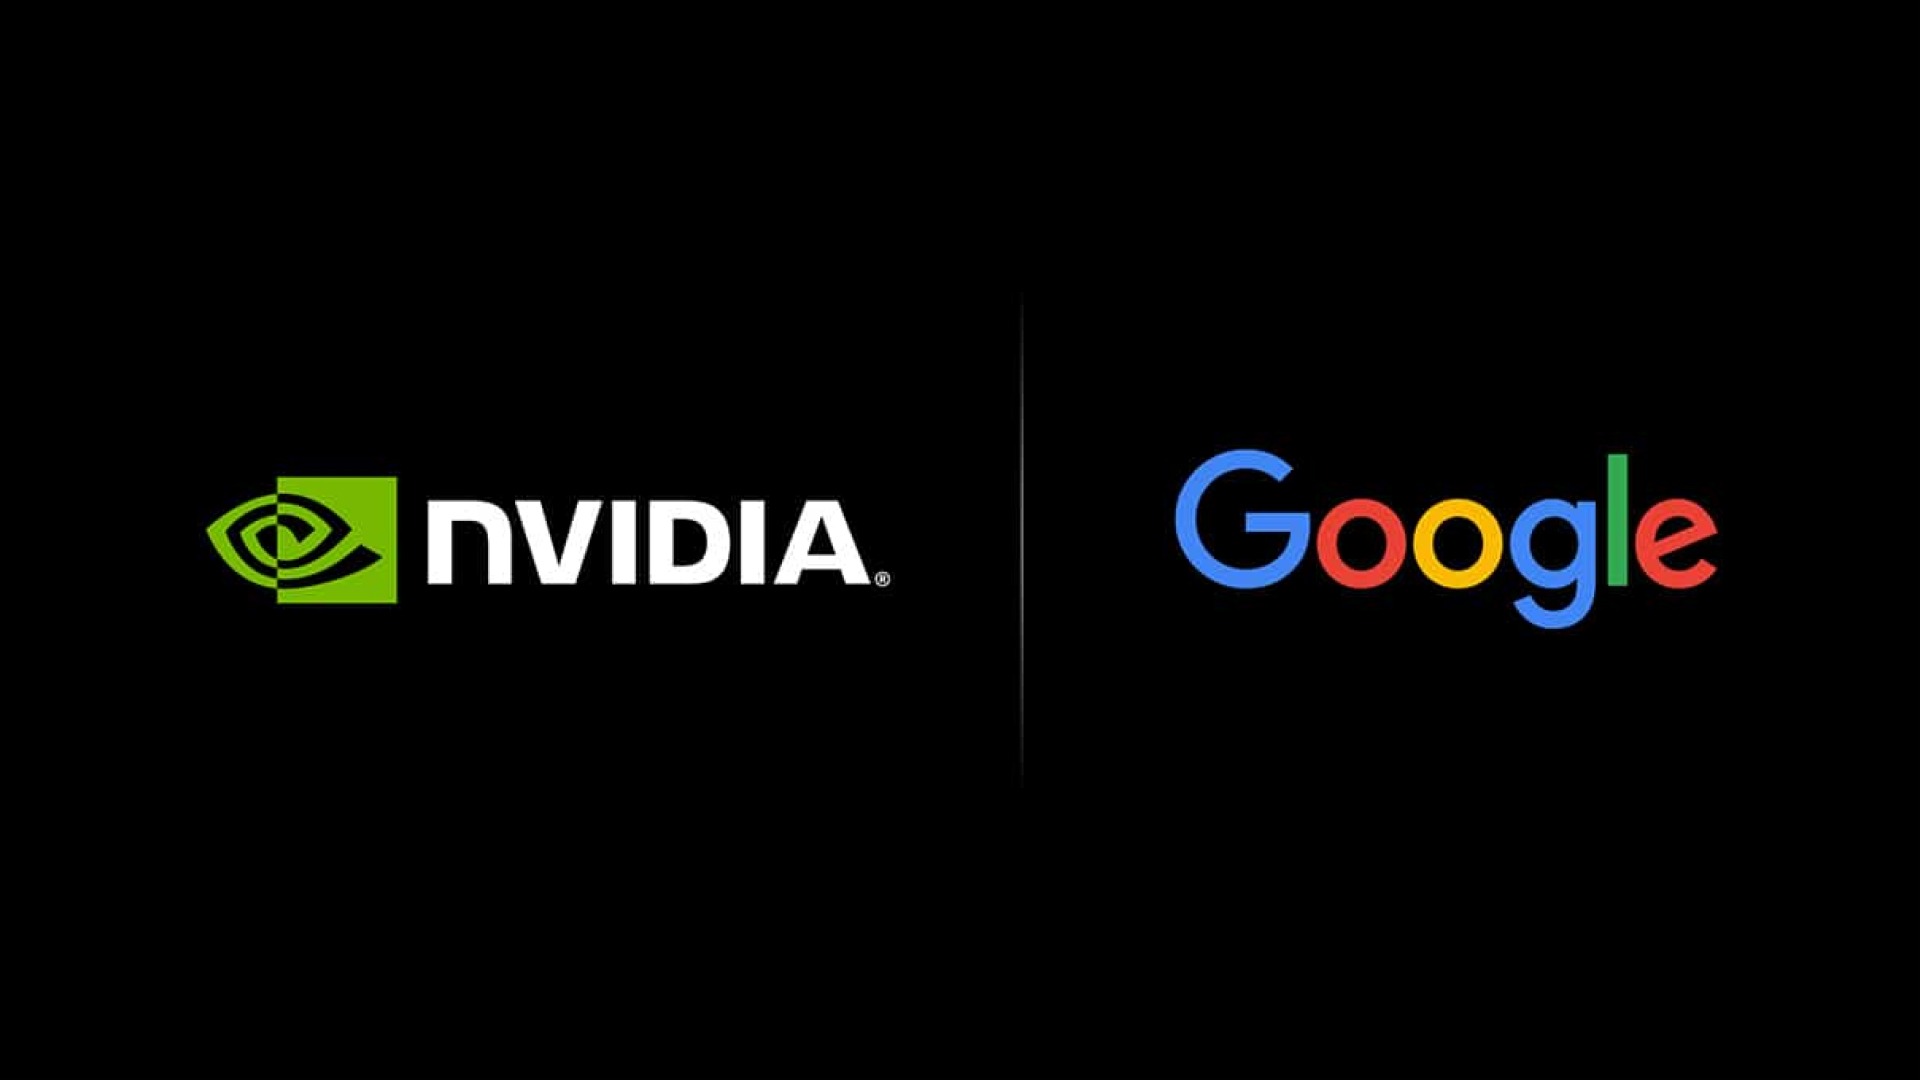 Shining Brighter Together: Google’s Gemma Optimized to Run on NVIDIA GPUs